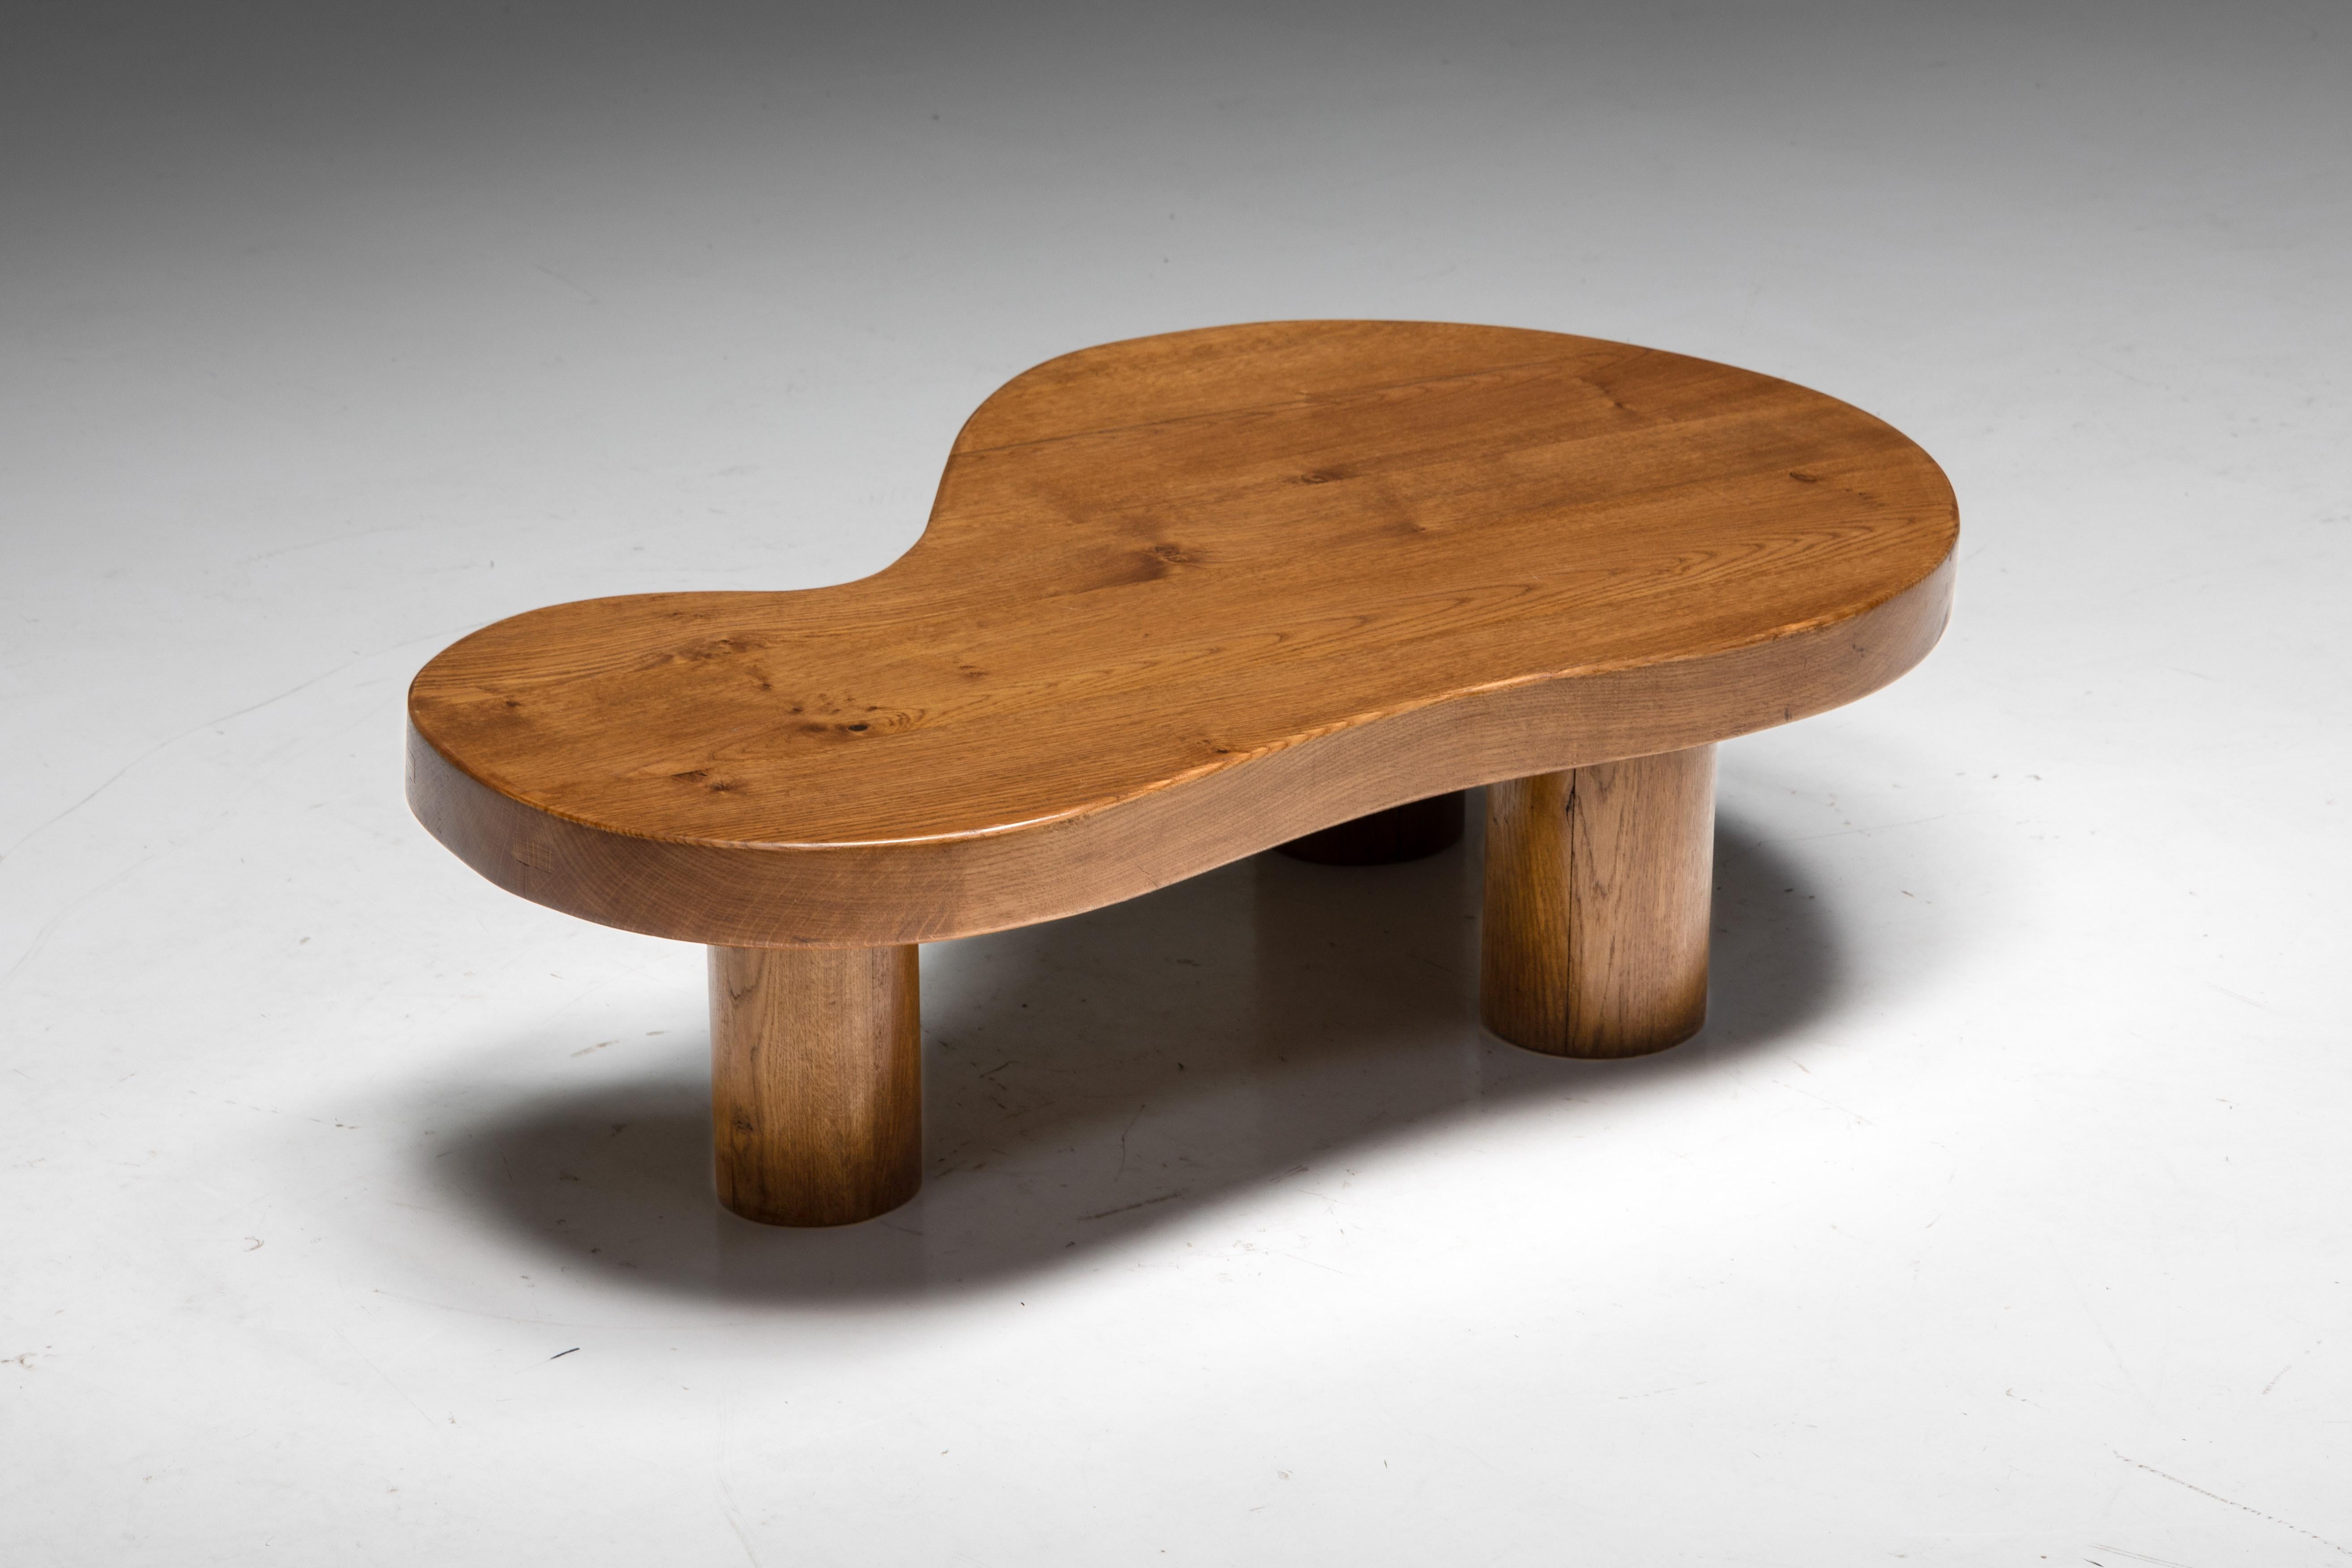 Organic; Freeform; Free Form; Charlotte Perriand; Pierre Chapo; Oak; Coffee Table; Midcentury Modern; Modern; 1950s; France;

Organic modern coffee table, a delightful blend of organic charm and 1950s allure, crafted in the style of Charlotte